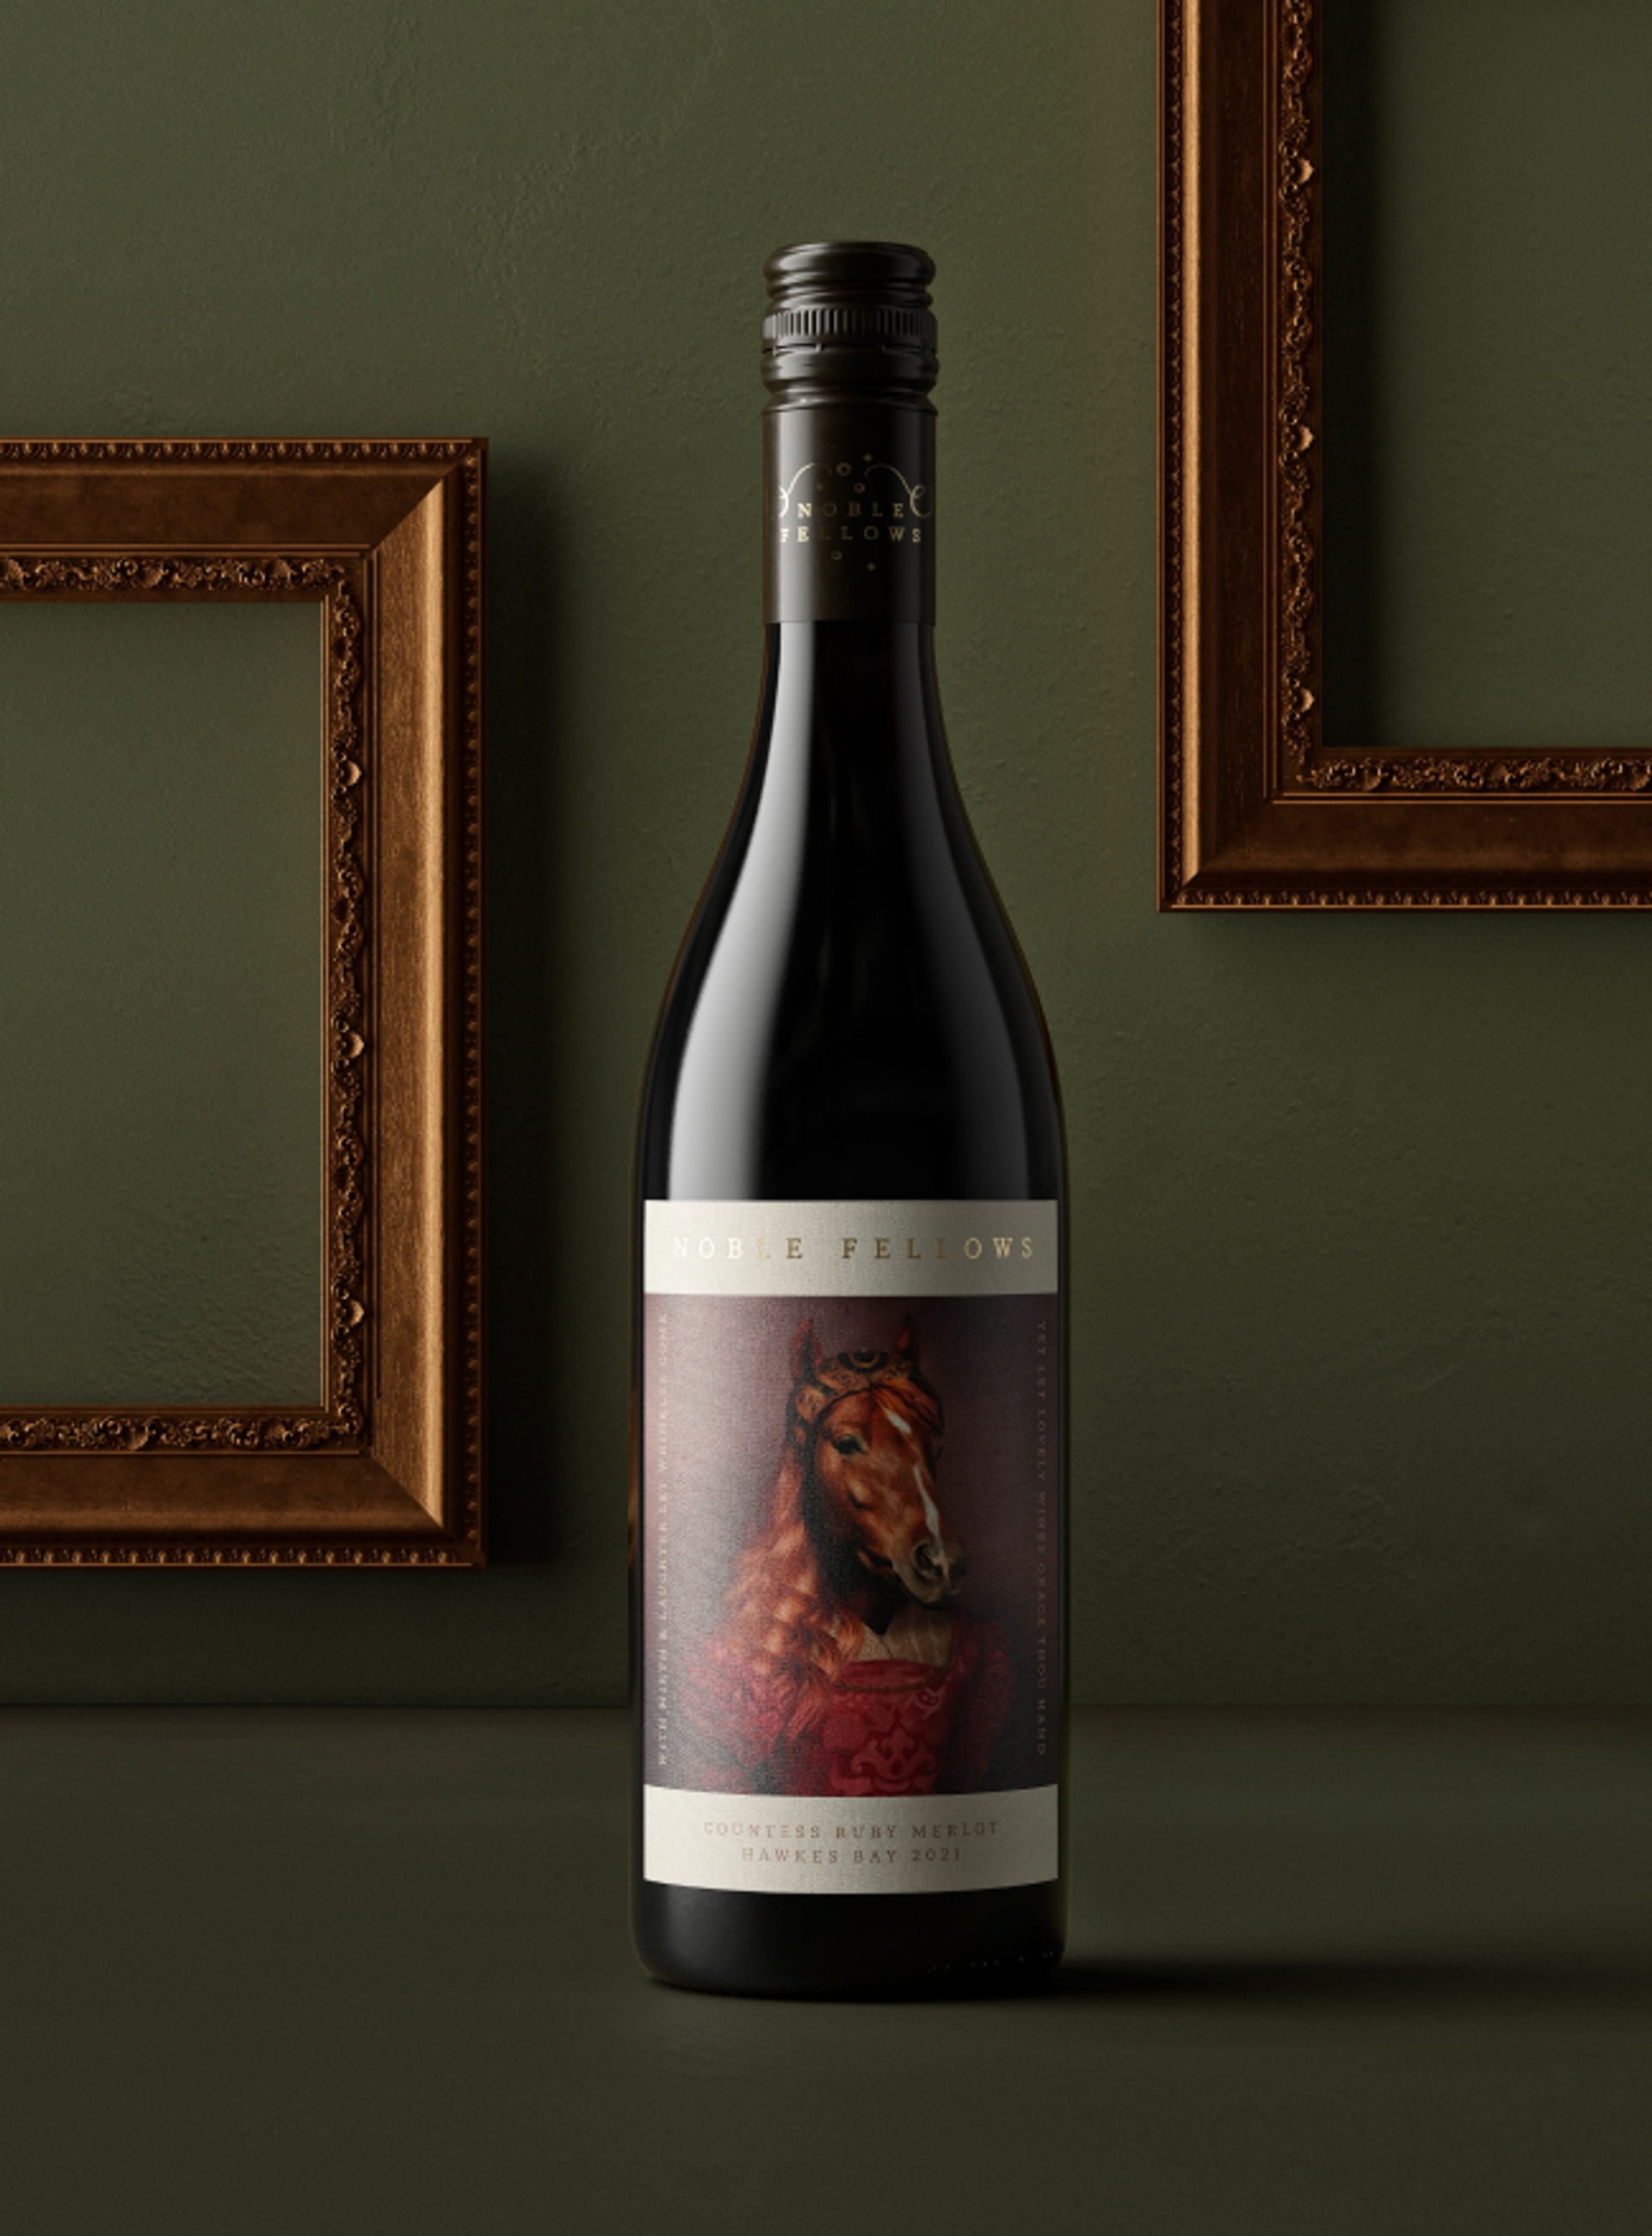 Wine label design on wine bottle of Noble Fellows “Countess Ruby Merlot”, wine packaging design by Our Revolution in Sydney in front of two embellished copper frames on a dark green wall